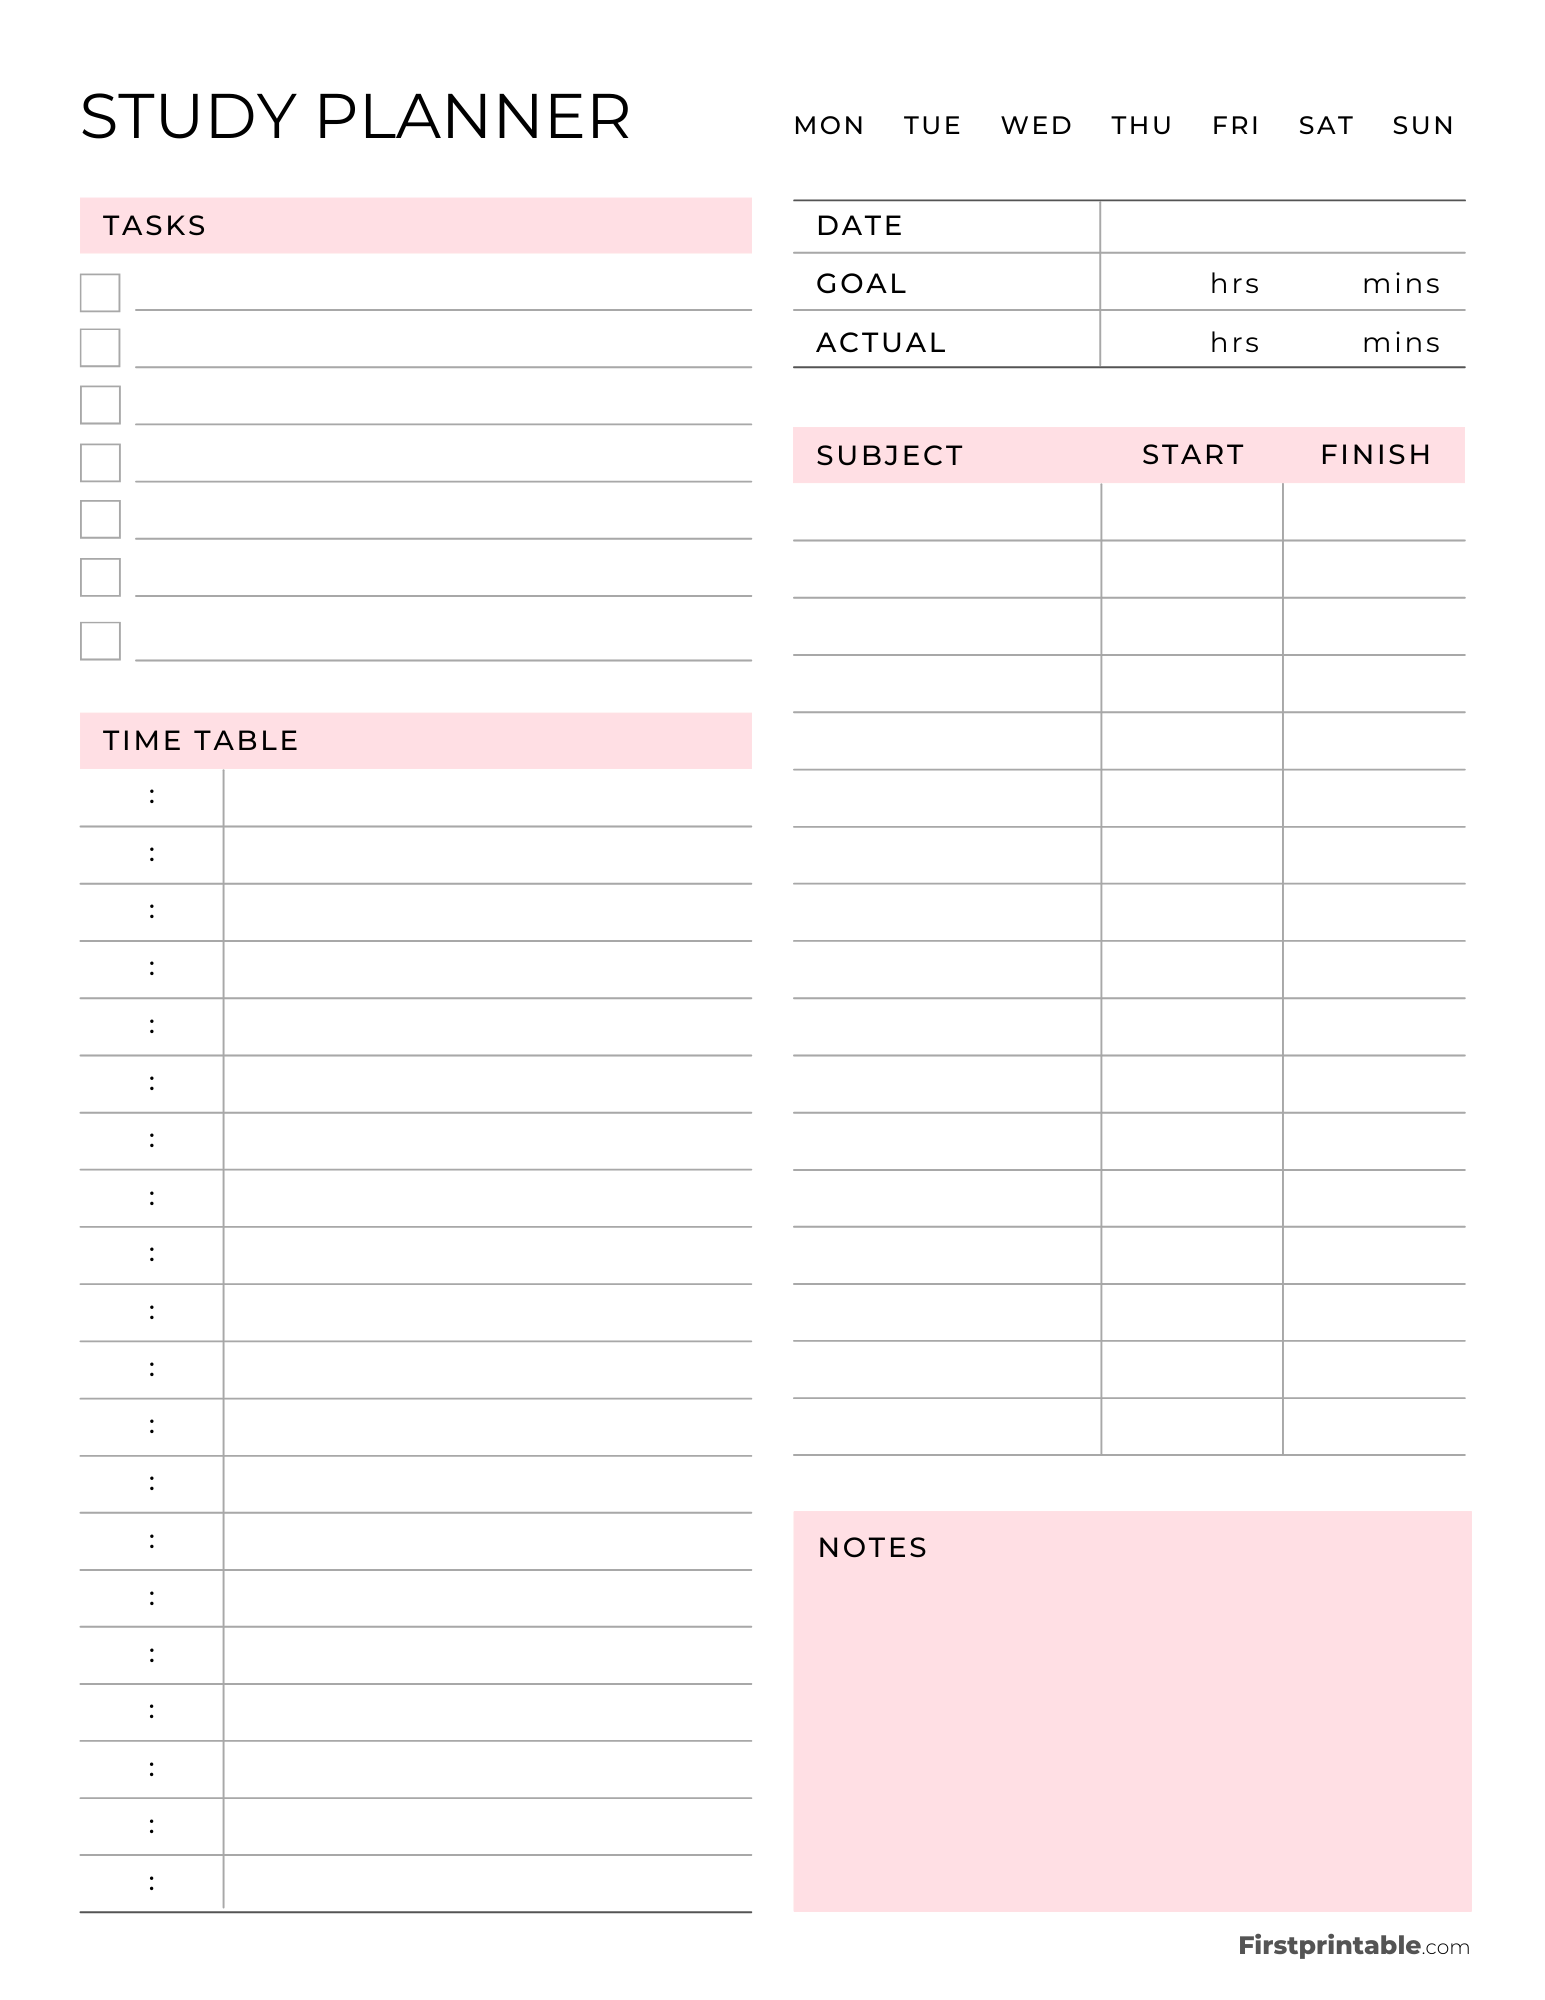 Printable Daily Study Planner Pink